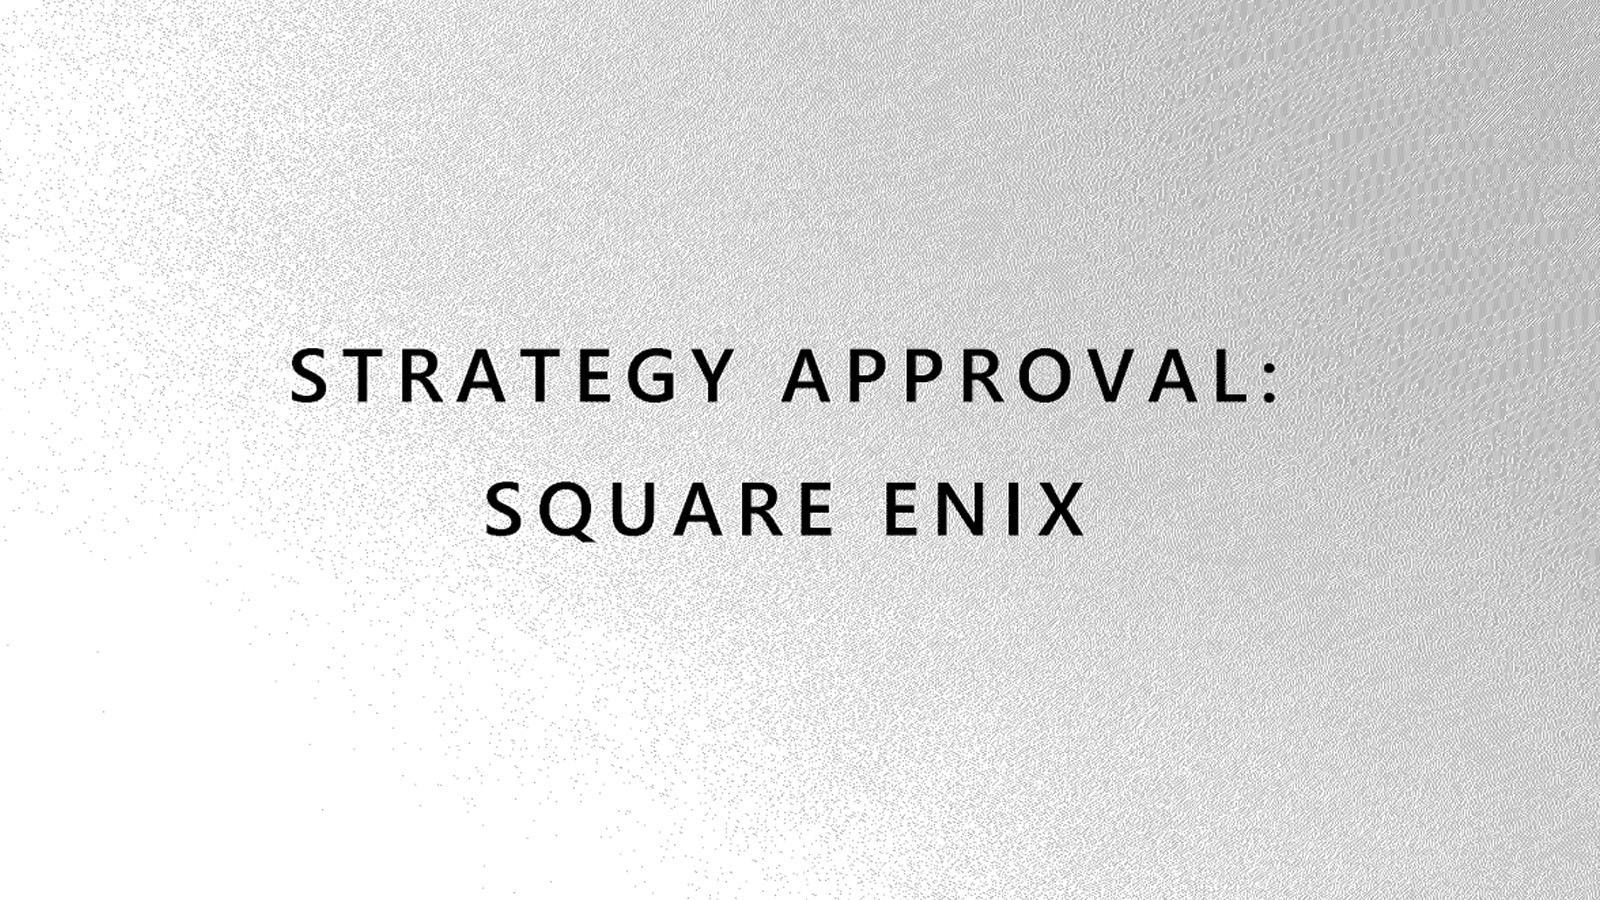 Microsoft considered acquiring Final Fantasy publisher Square Enix,  internal documents reveal